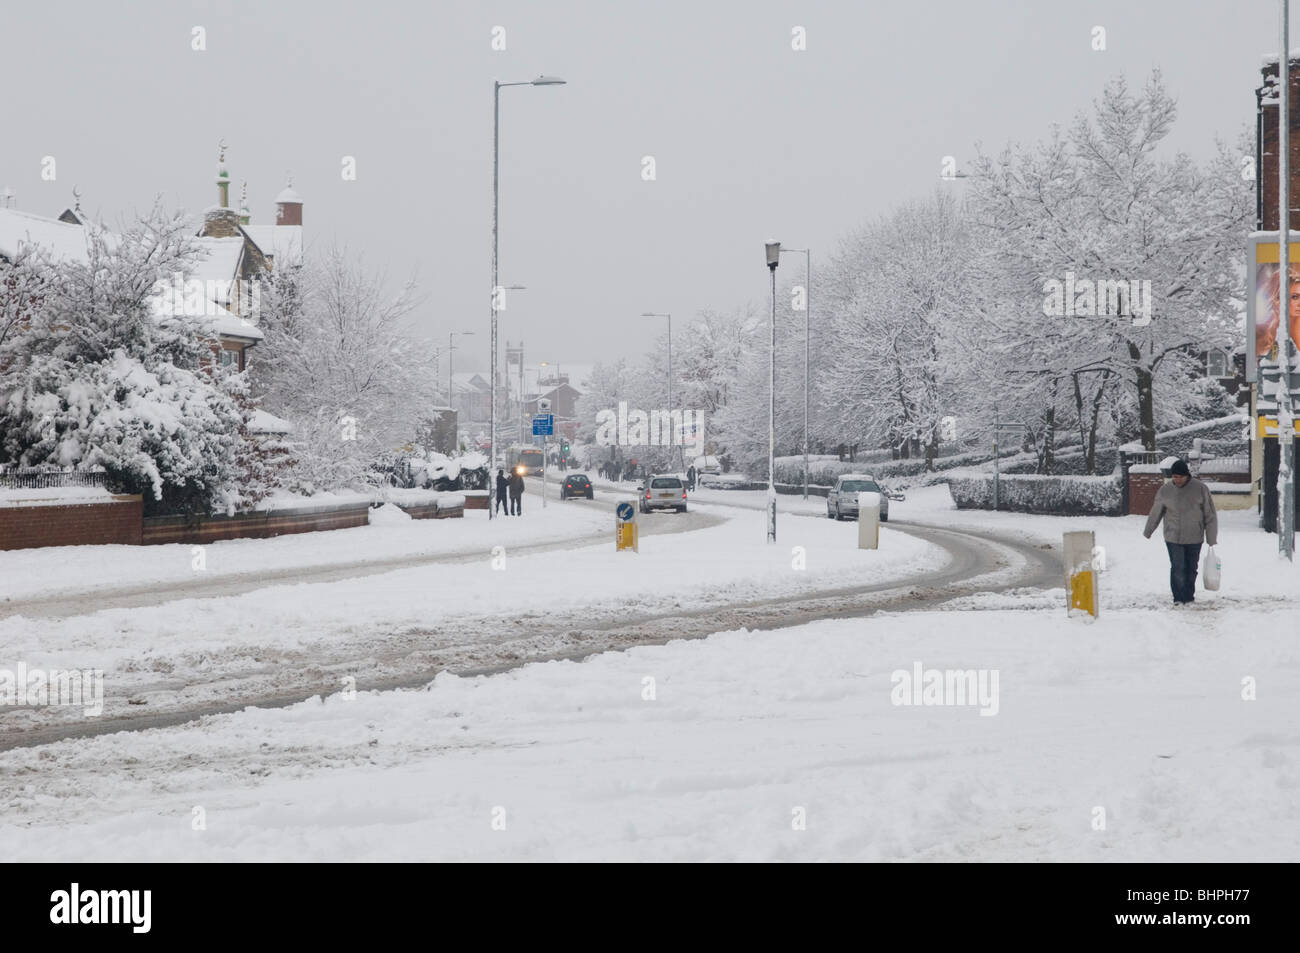 Severe snow storm on Cheetham hill road Manchester UK Stock Photo